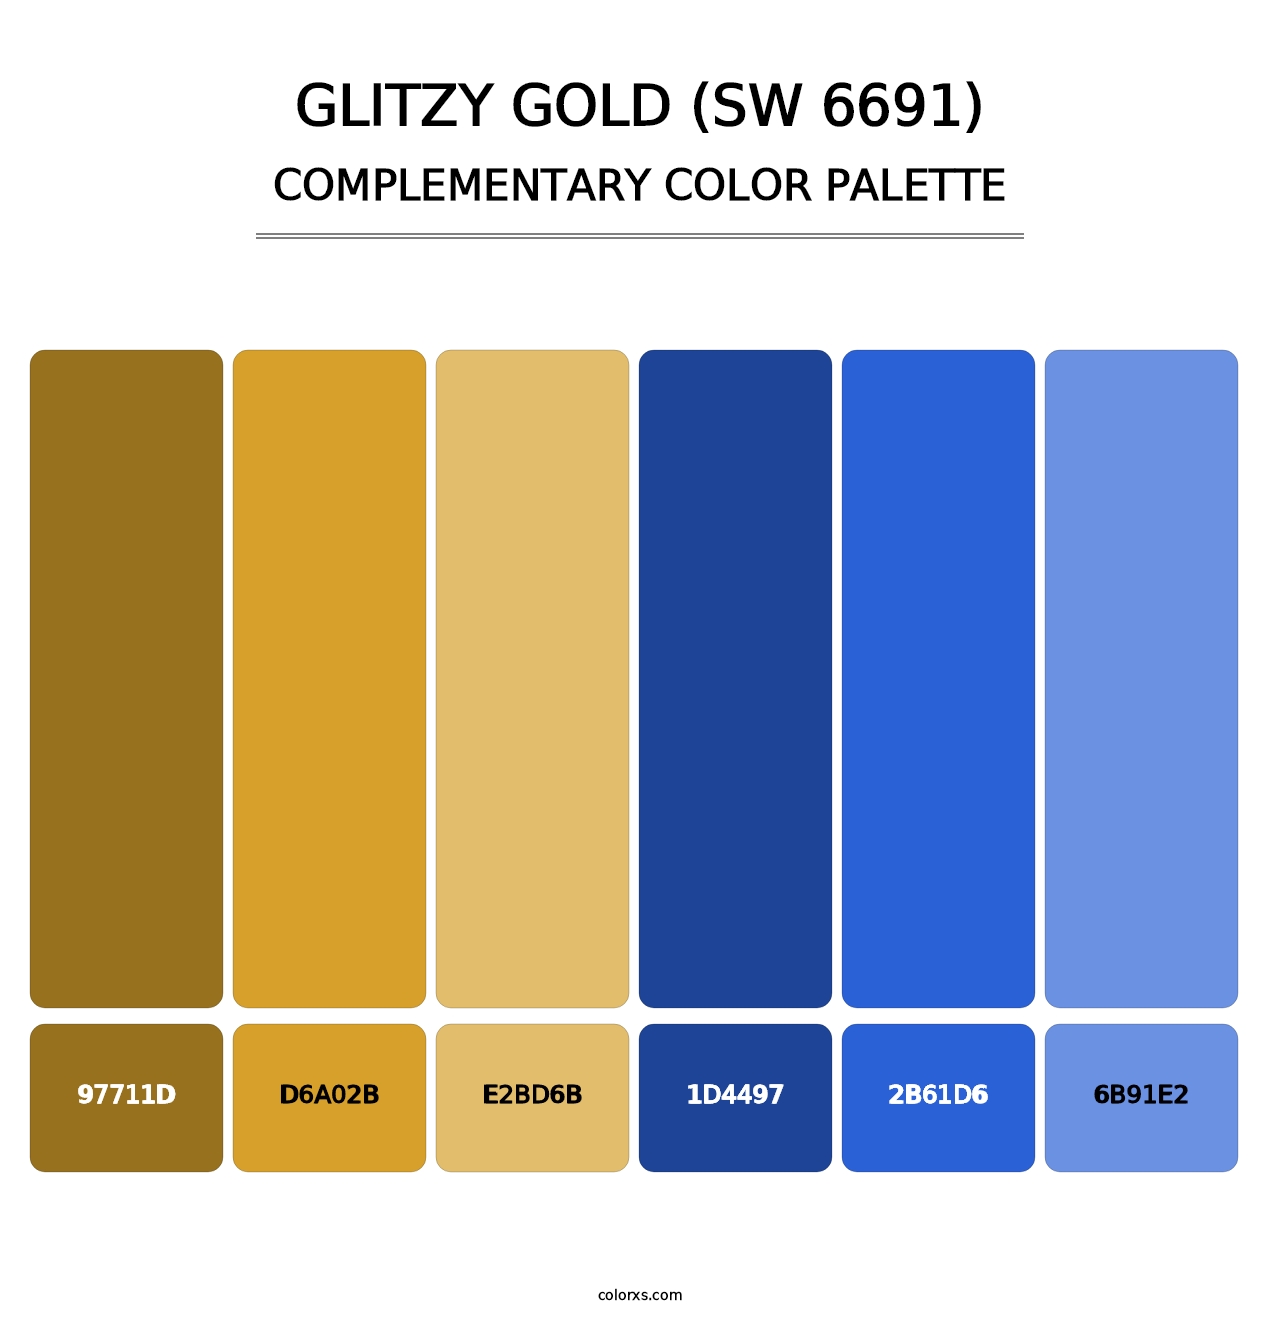 Glitzy Gold (SW 6691) - Complementary Color Palette